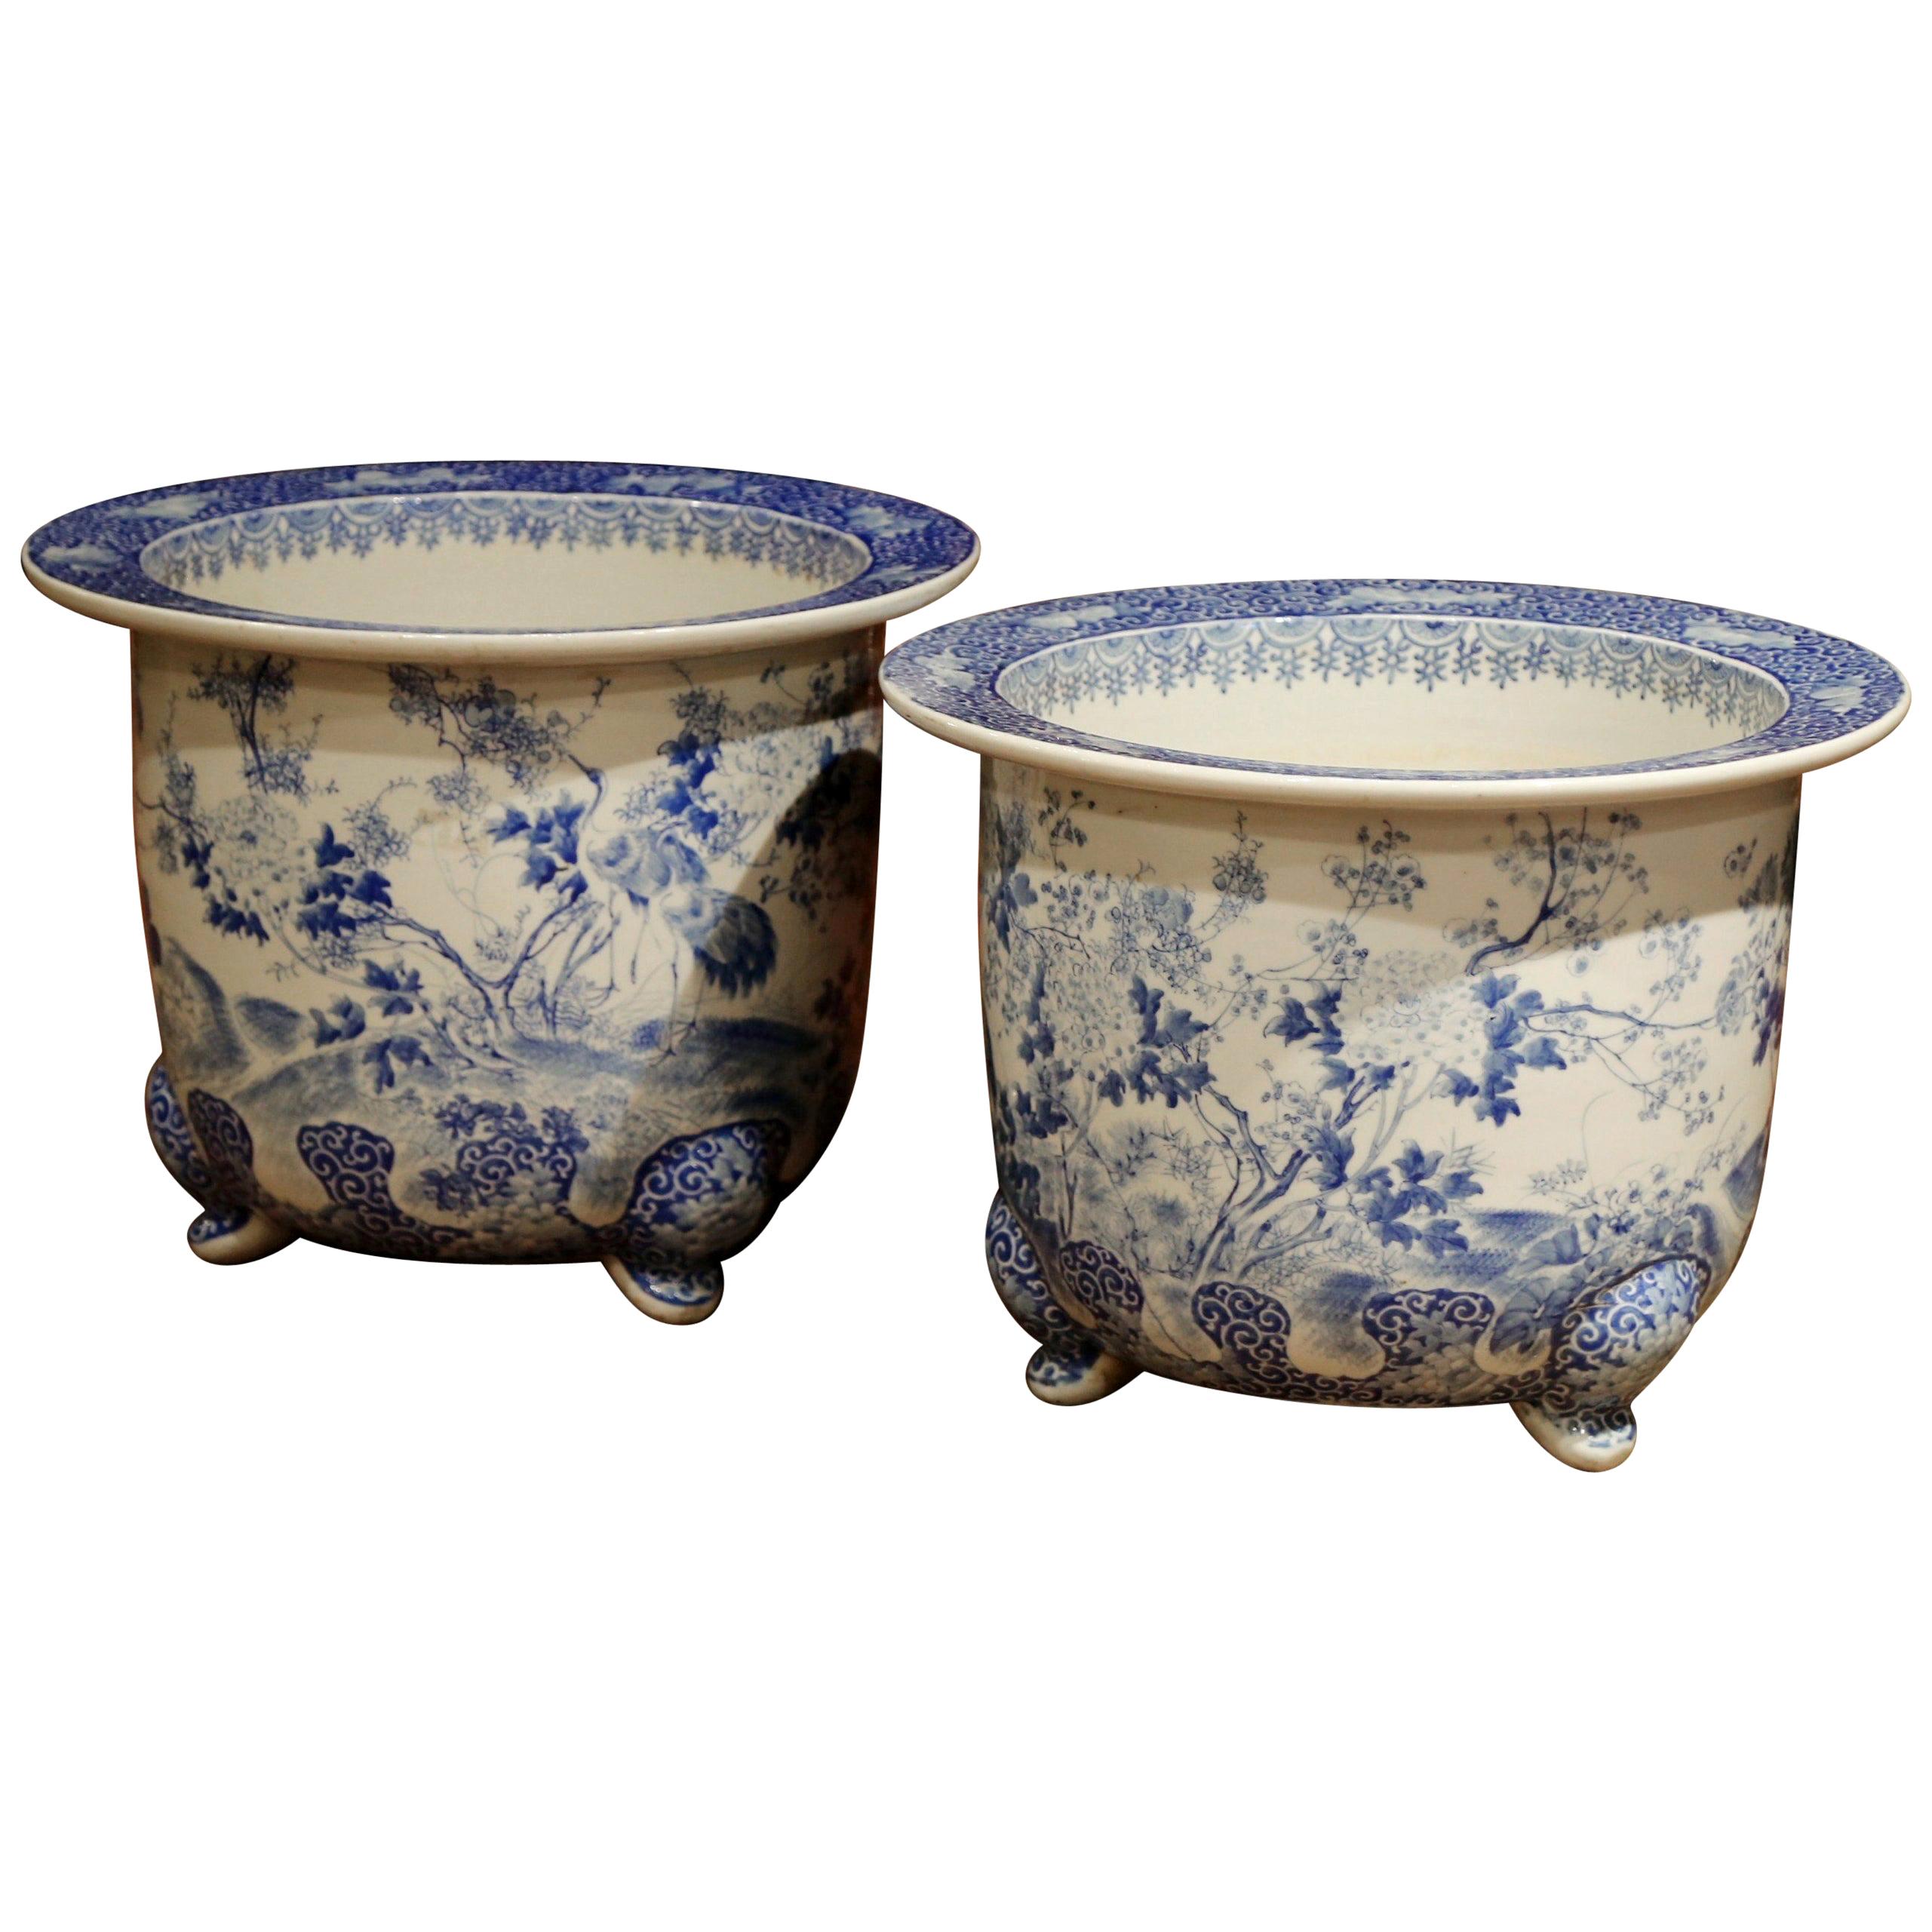 Pair of 19th Century Japanese Meiji Period Blue and White Porcelain Cache-Pots